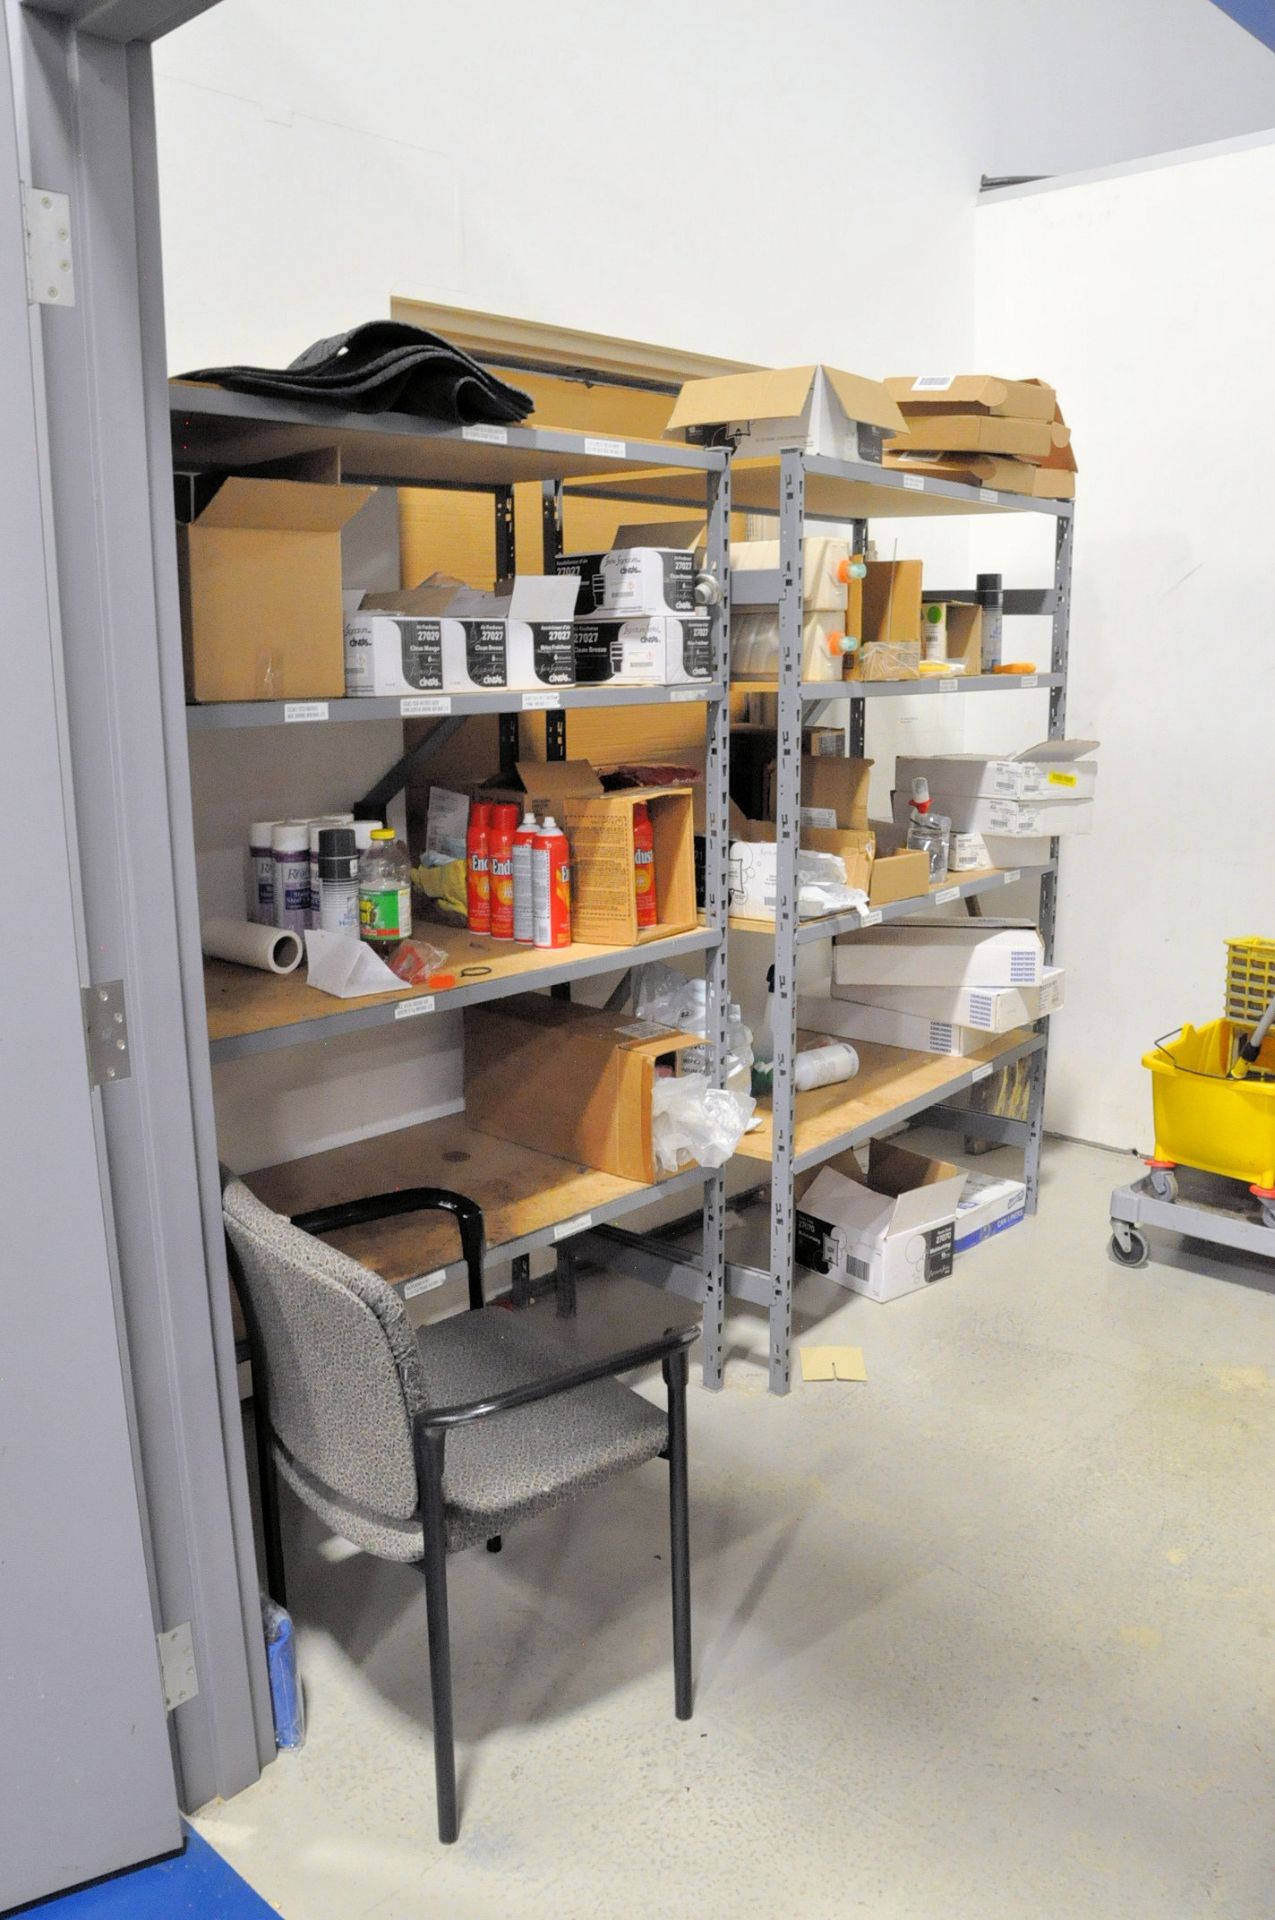 Lot-Various Janitorial Supplies with 4-Sections Shelving in (1) Storeroom - Image 2 of 8